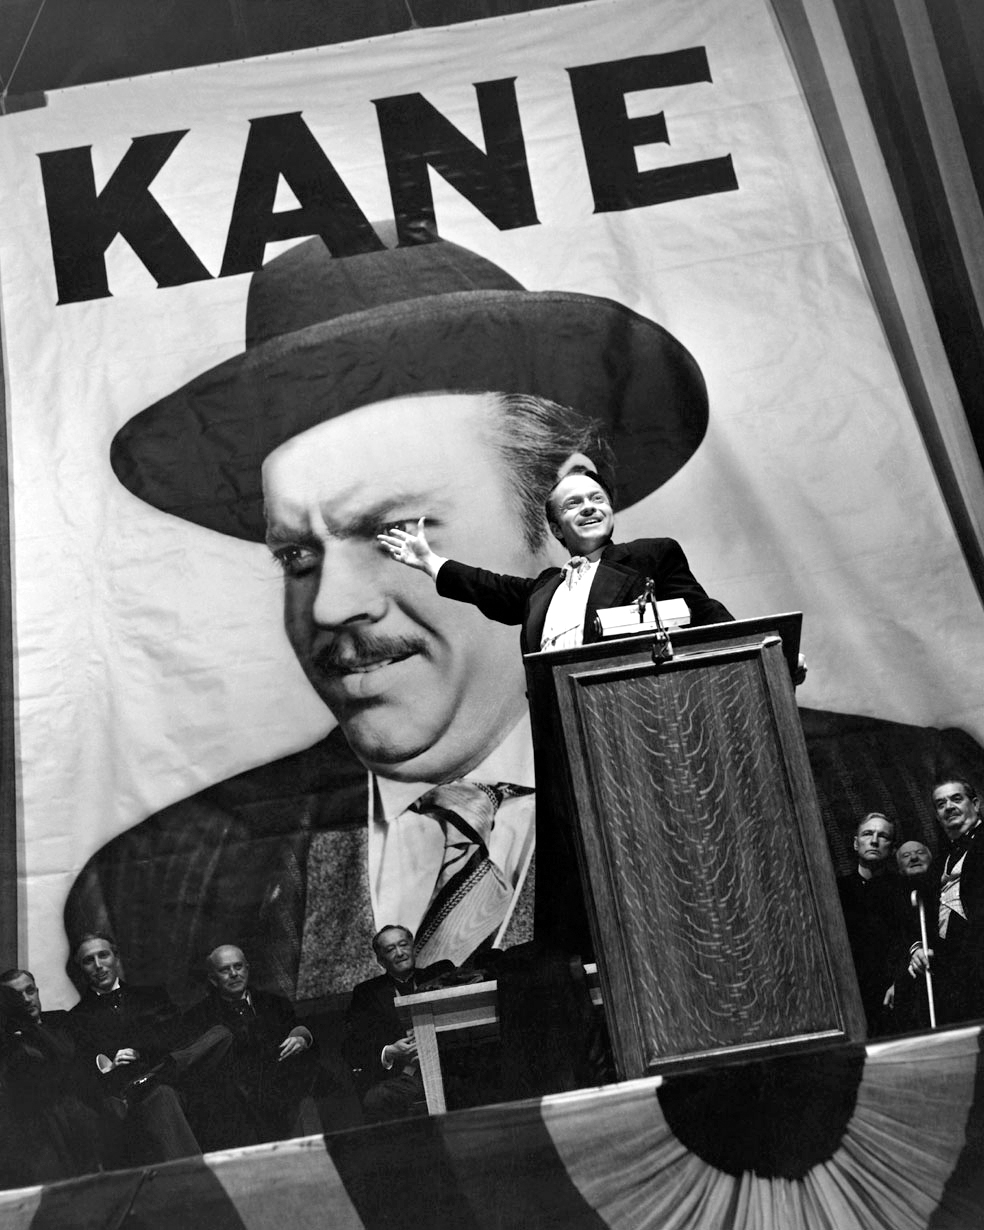 Orson Welles as Charles Kane on a stage, gestering his hand from behind a podium. Behind him are men in suits, sitting and a giant banner with his face and name.